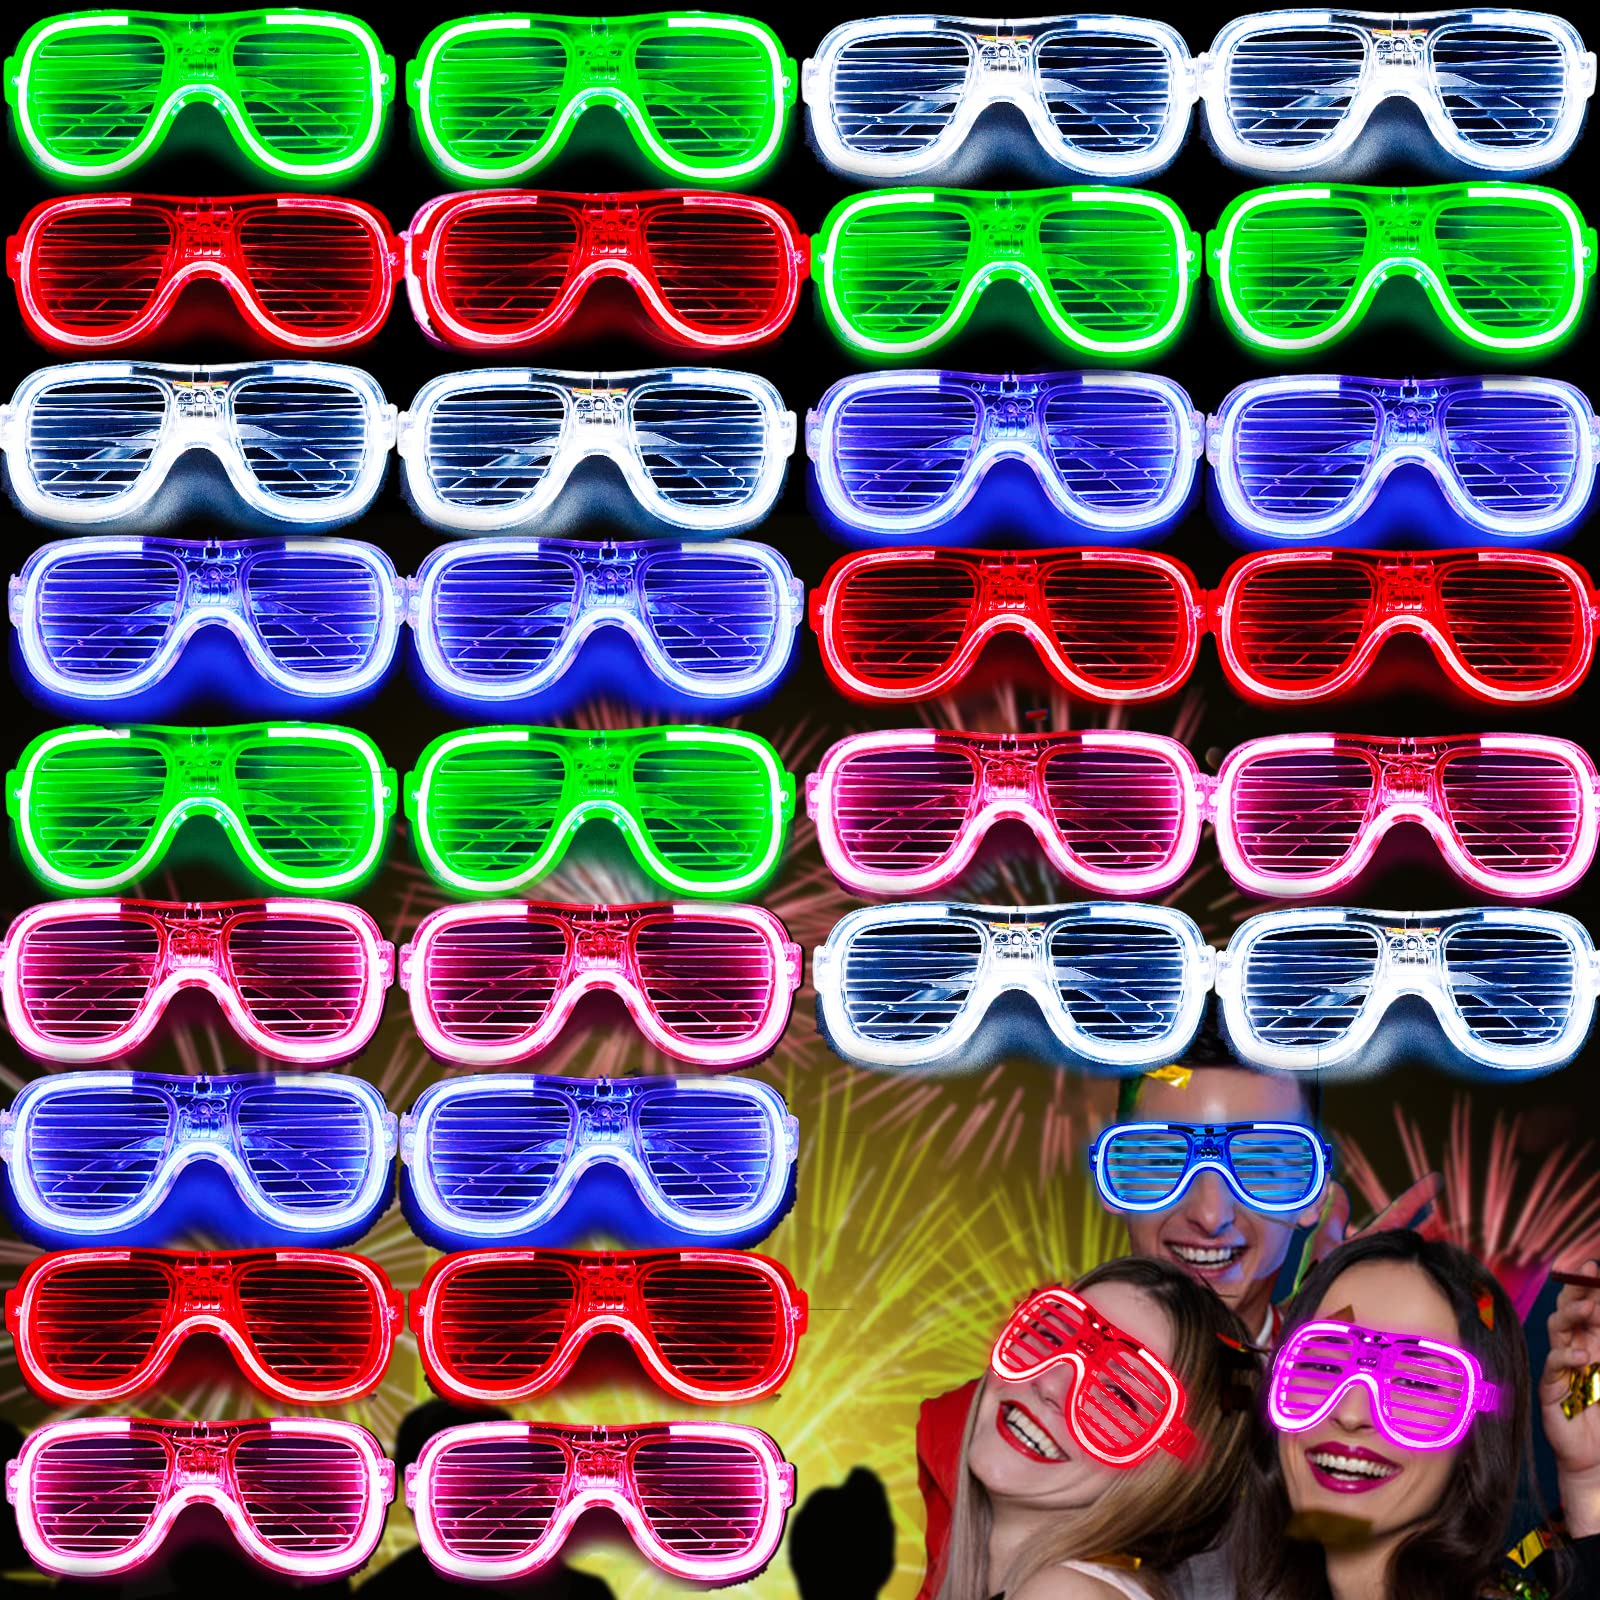 

Other Festive Party Supplies Max Fun Led Light Up Glasses Toys Plastic Shutter Shades Flashing Glow In The Dark Sticks Sunglasses amhXl